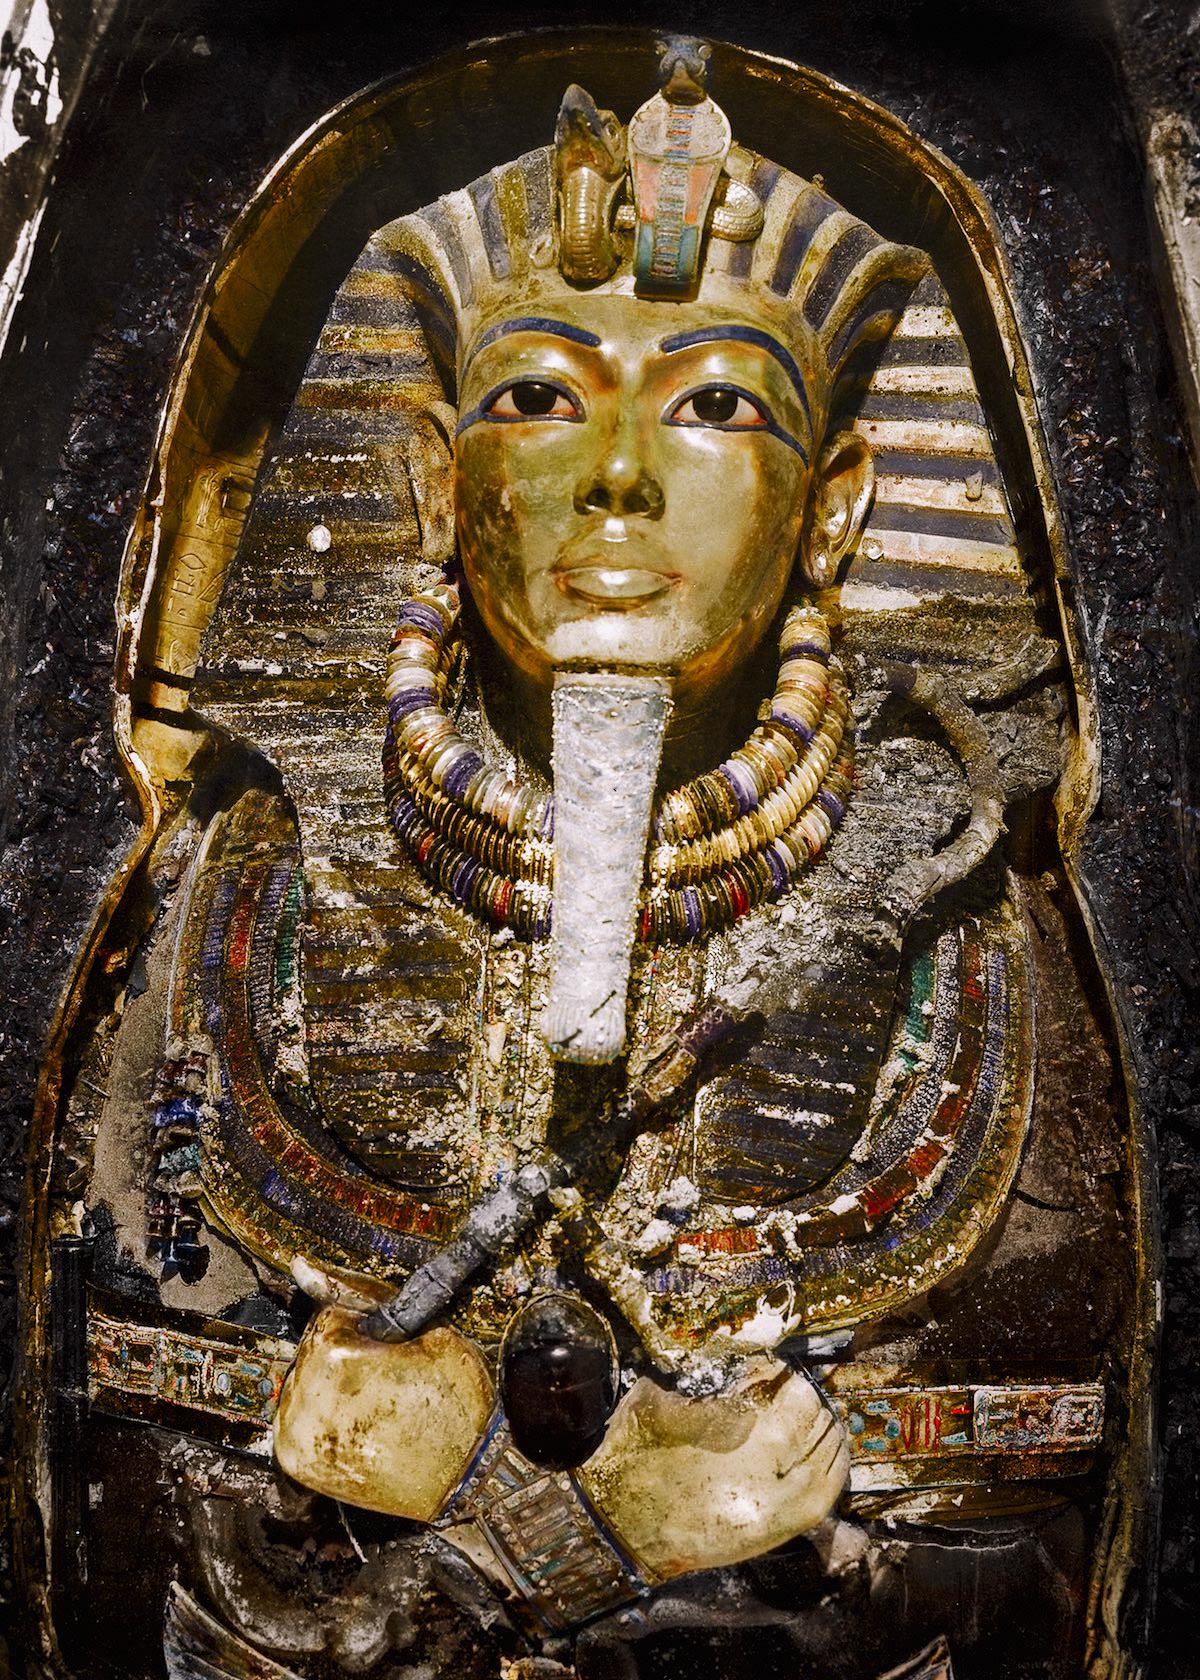 The Opening of King Tut's Tomb, Shown in Stunning Colorized Photos ...
